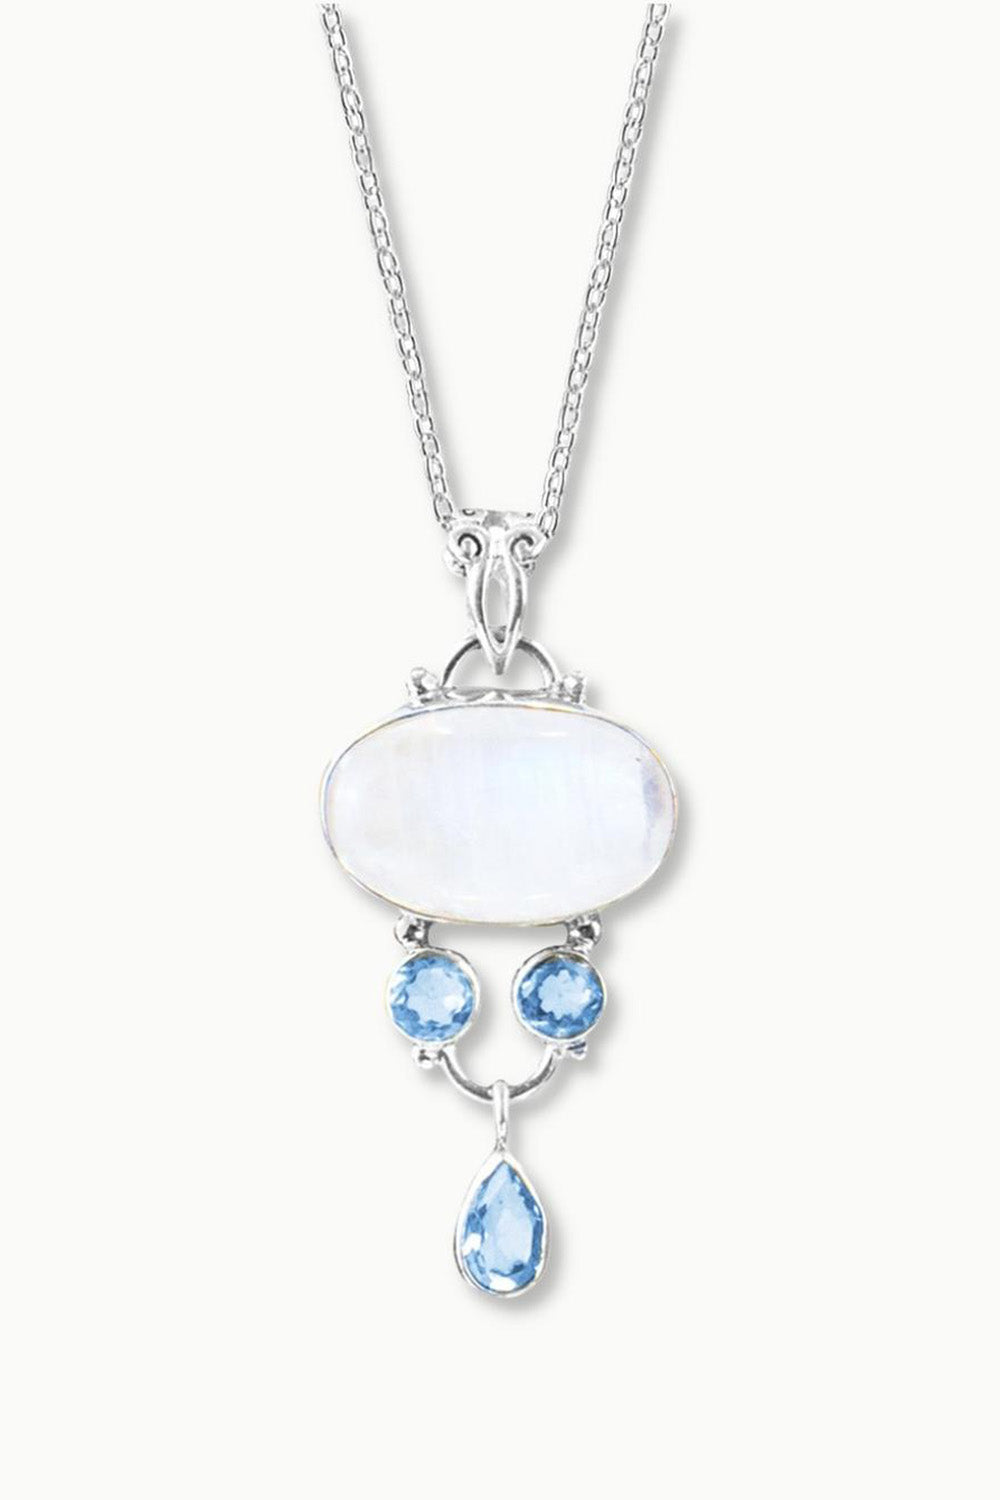 Sivalya Moonstone Silver Necklace - Mindfulness